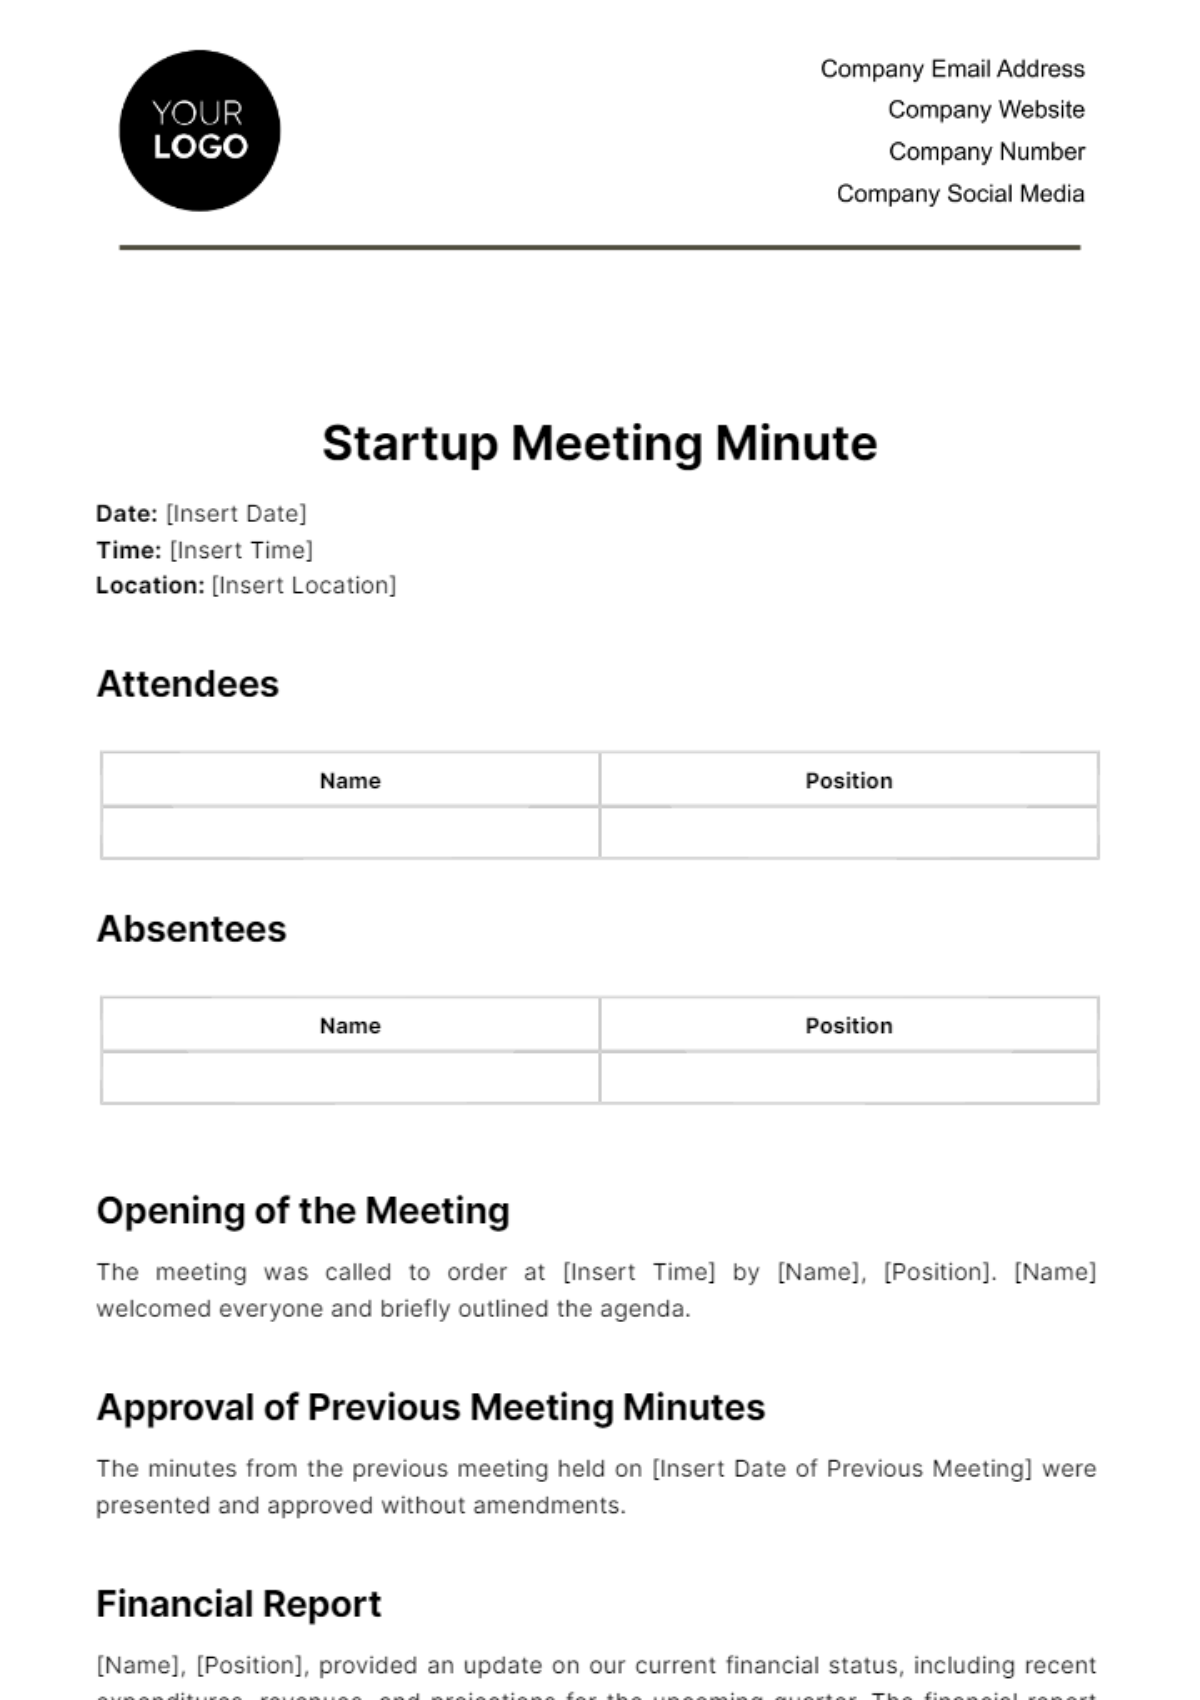 Free Startup Meeting Minute Template